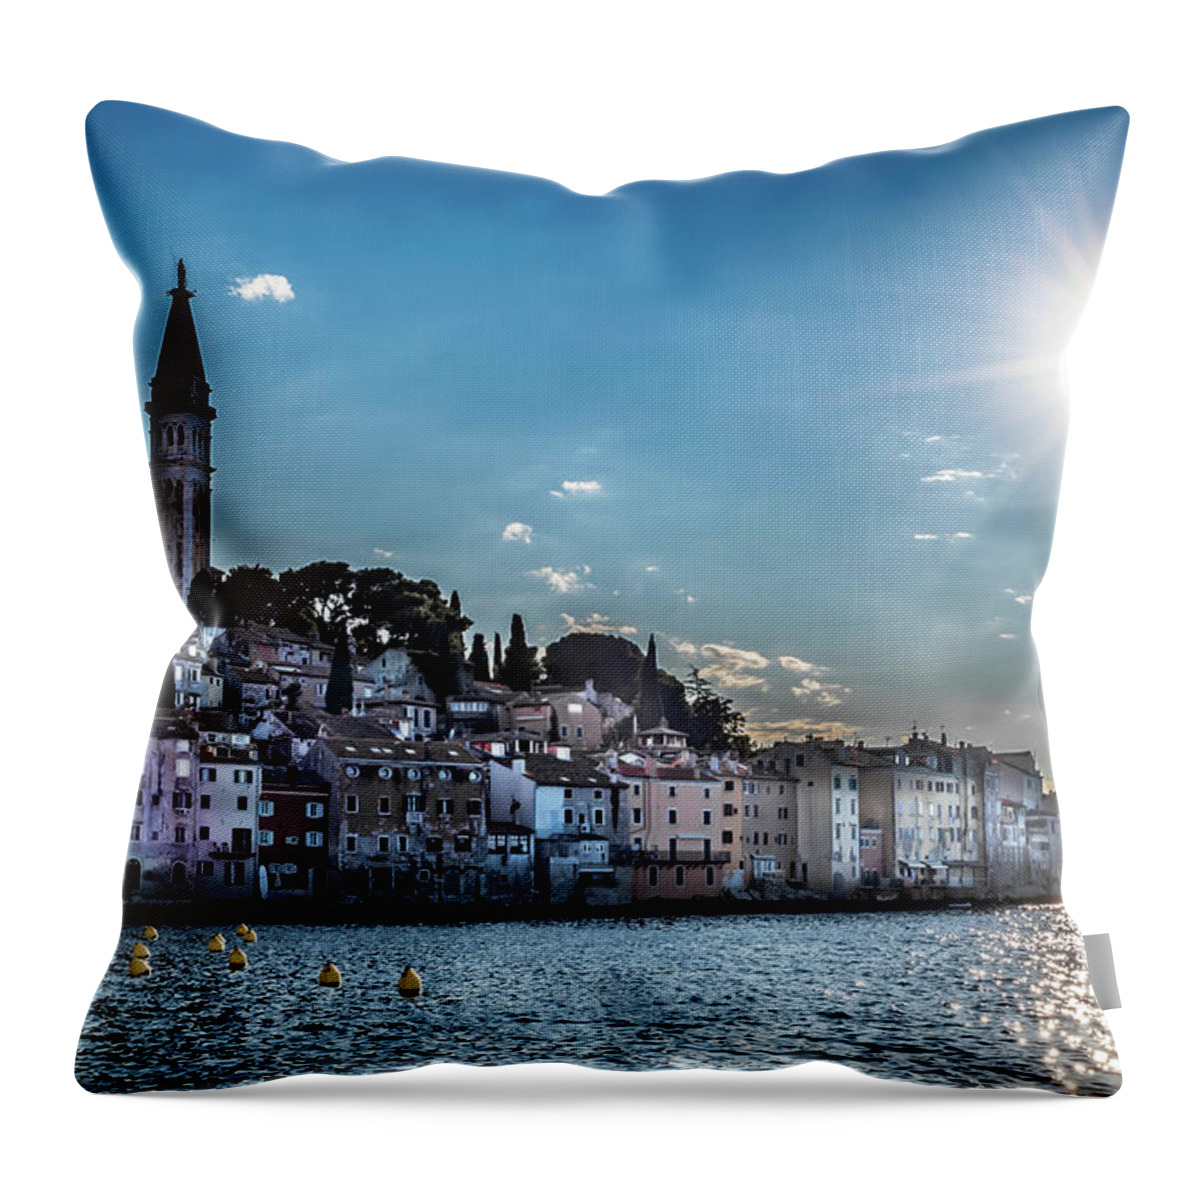 Croatia Throw Pillow featuring the photograph Old Town Of The City Of Rovinj In Croatia by Andreas Berthold